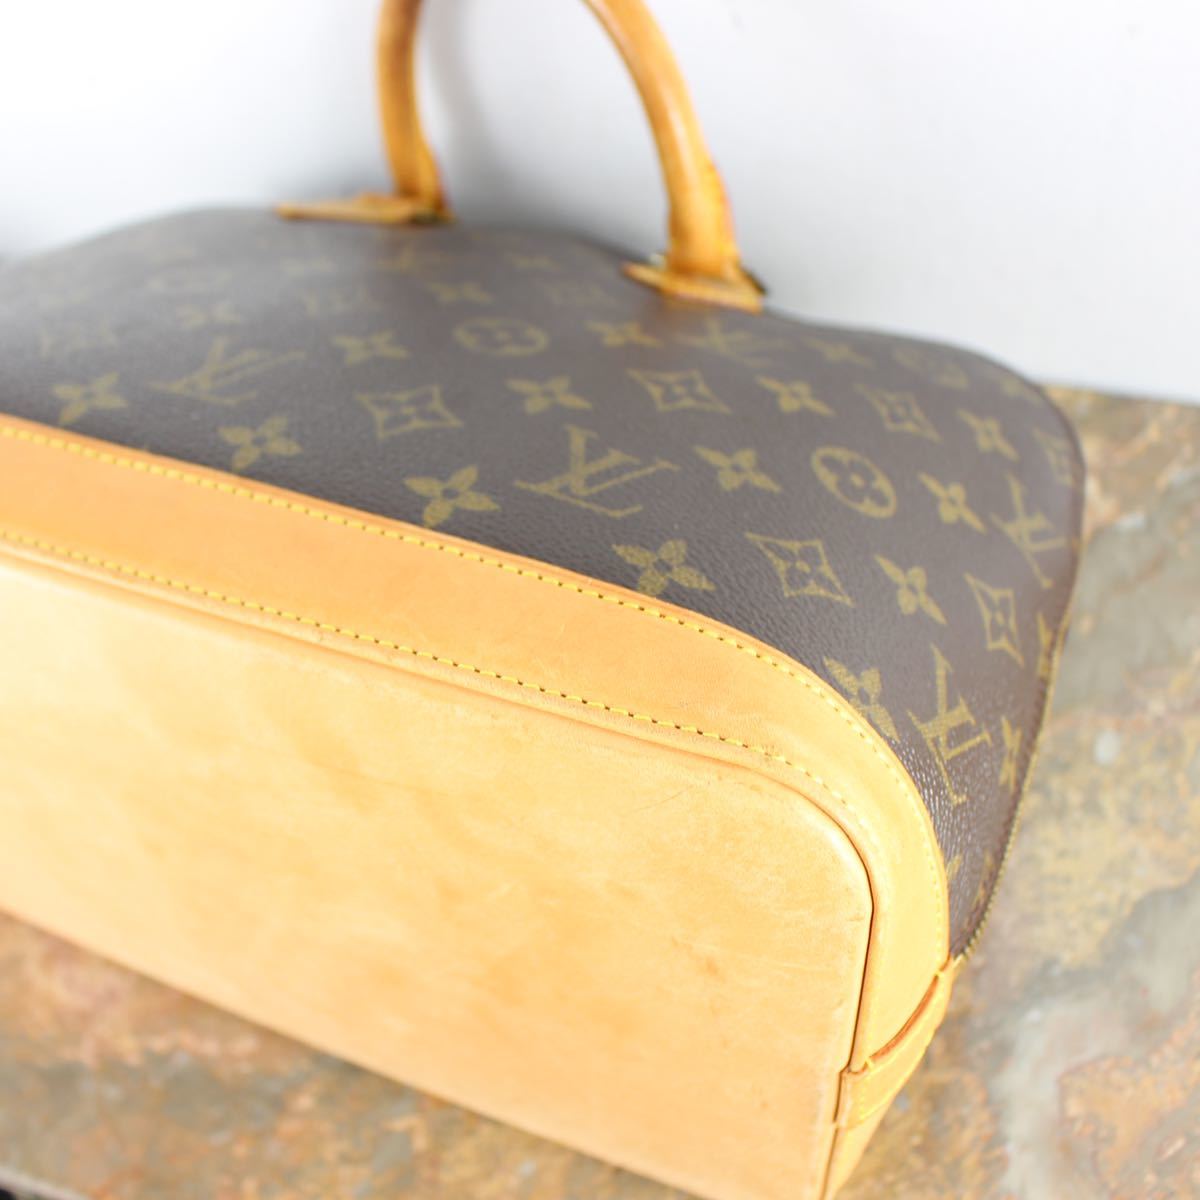 LOUIS VUITTON M51130 BA1907 MONOGRAM PATTERNED HAND BAG MADE IN